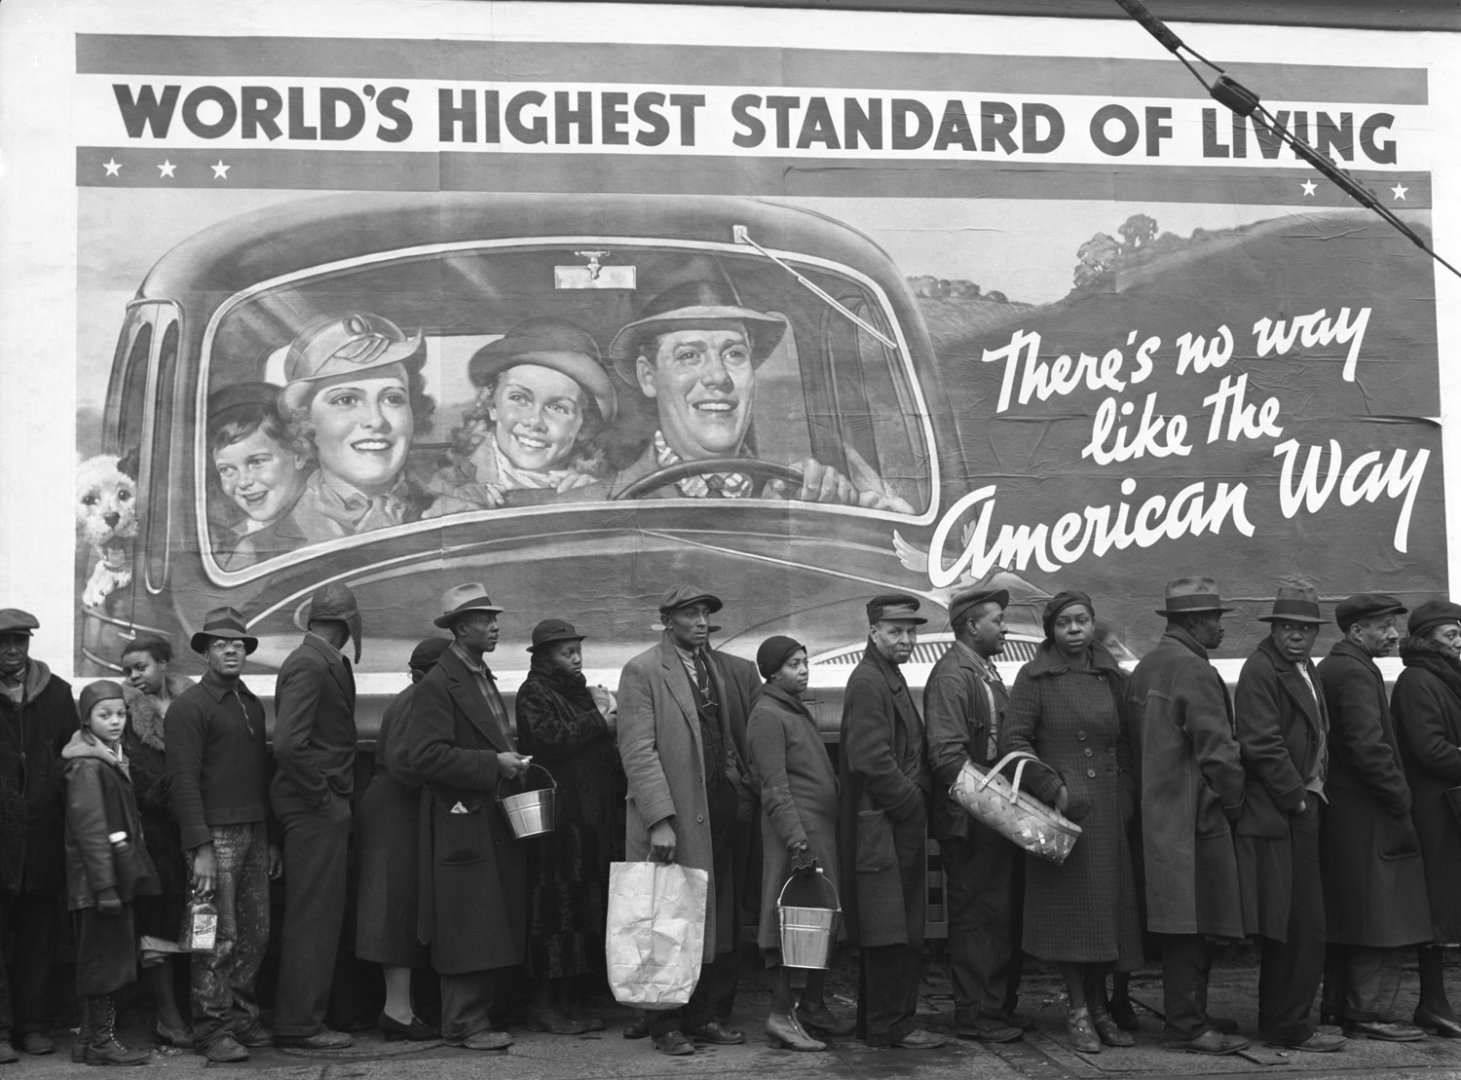 "The American Way" (1937), by Margaret Bourke-White